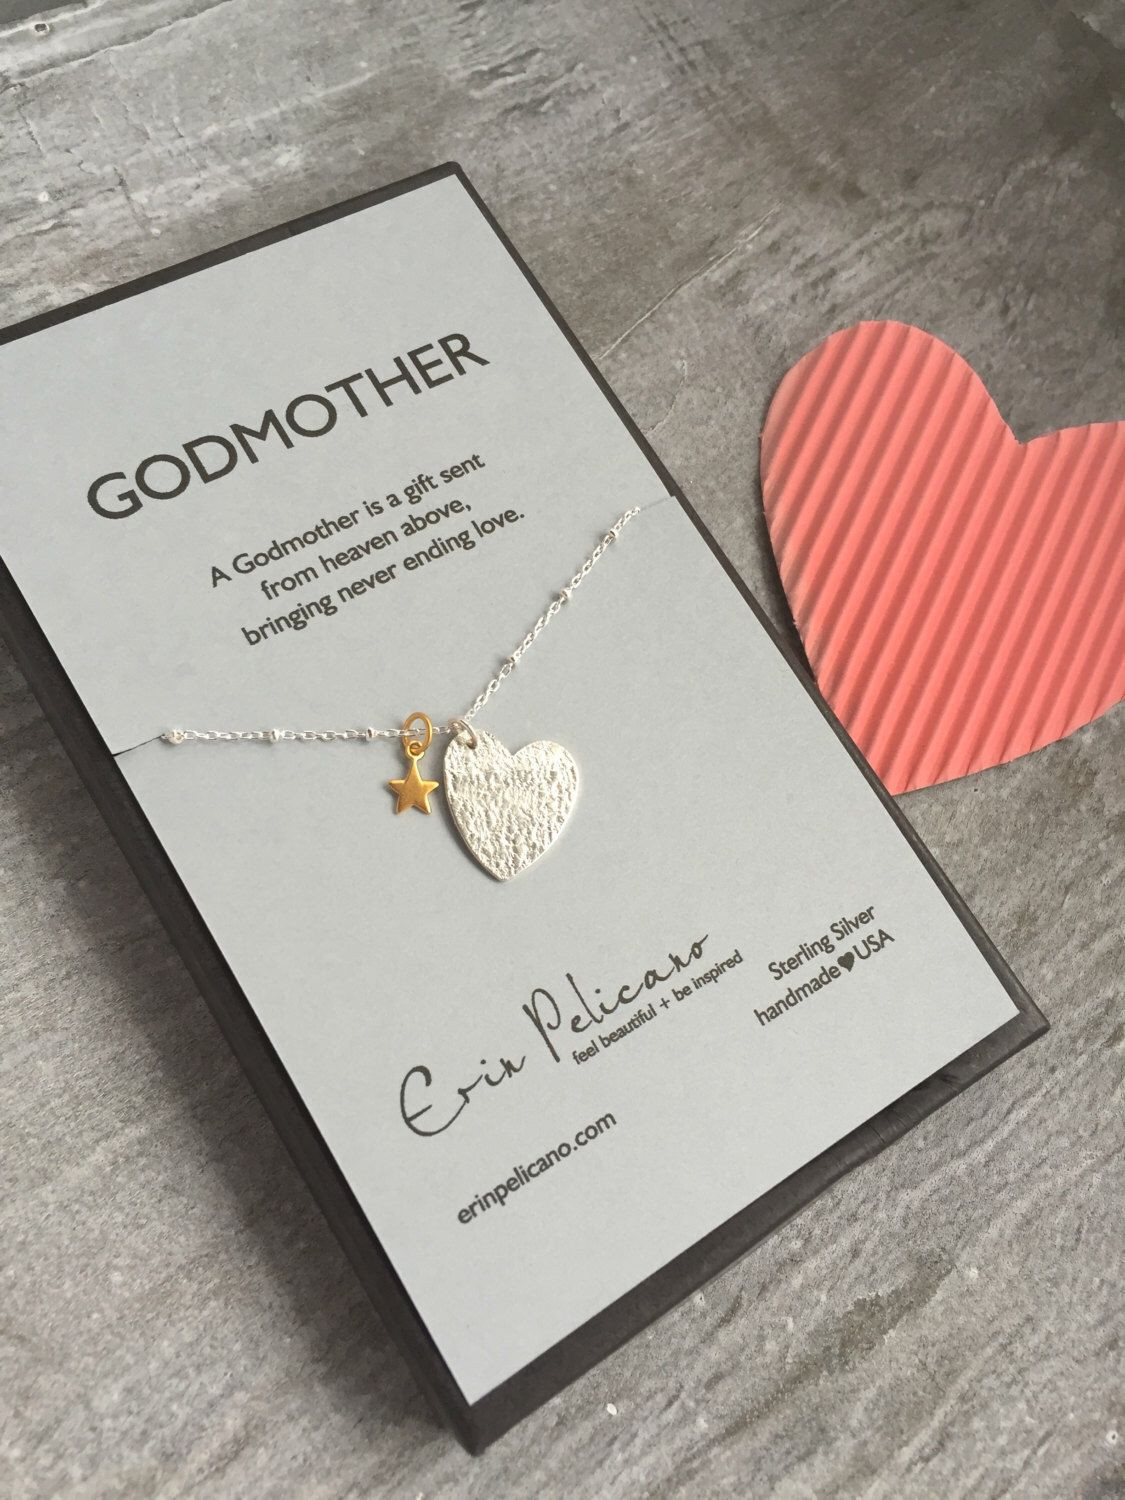 Christening Gift Ideas From Godmother
 Godmother Necklace Will You Be My Godmother